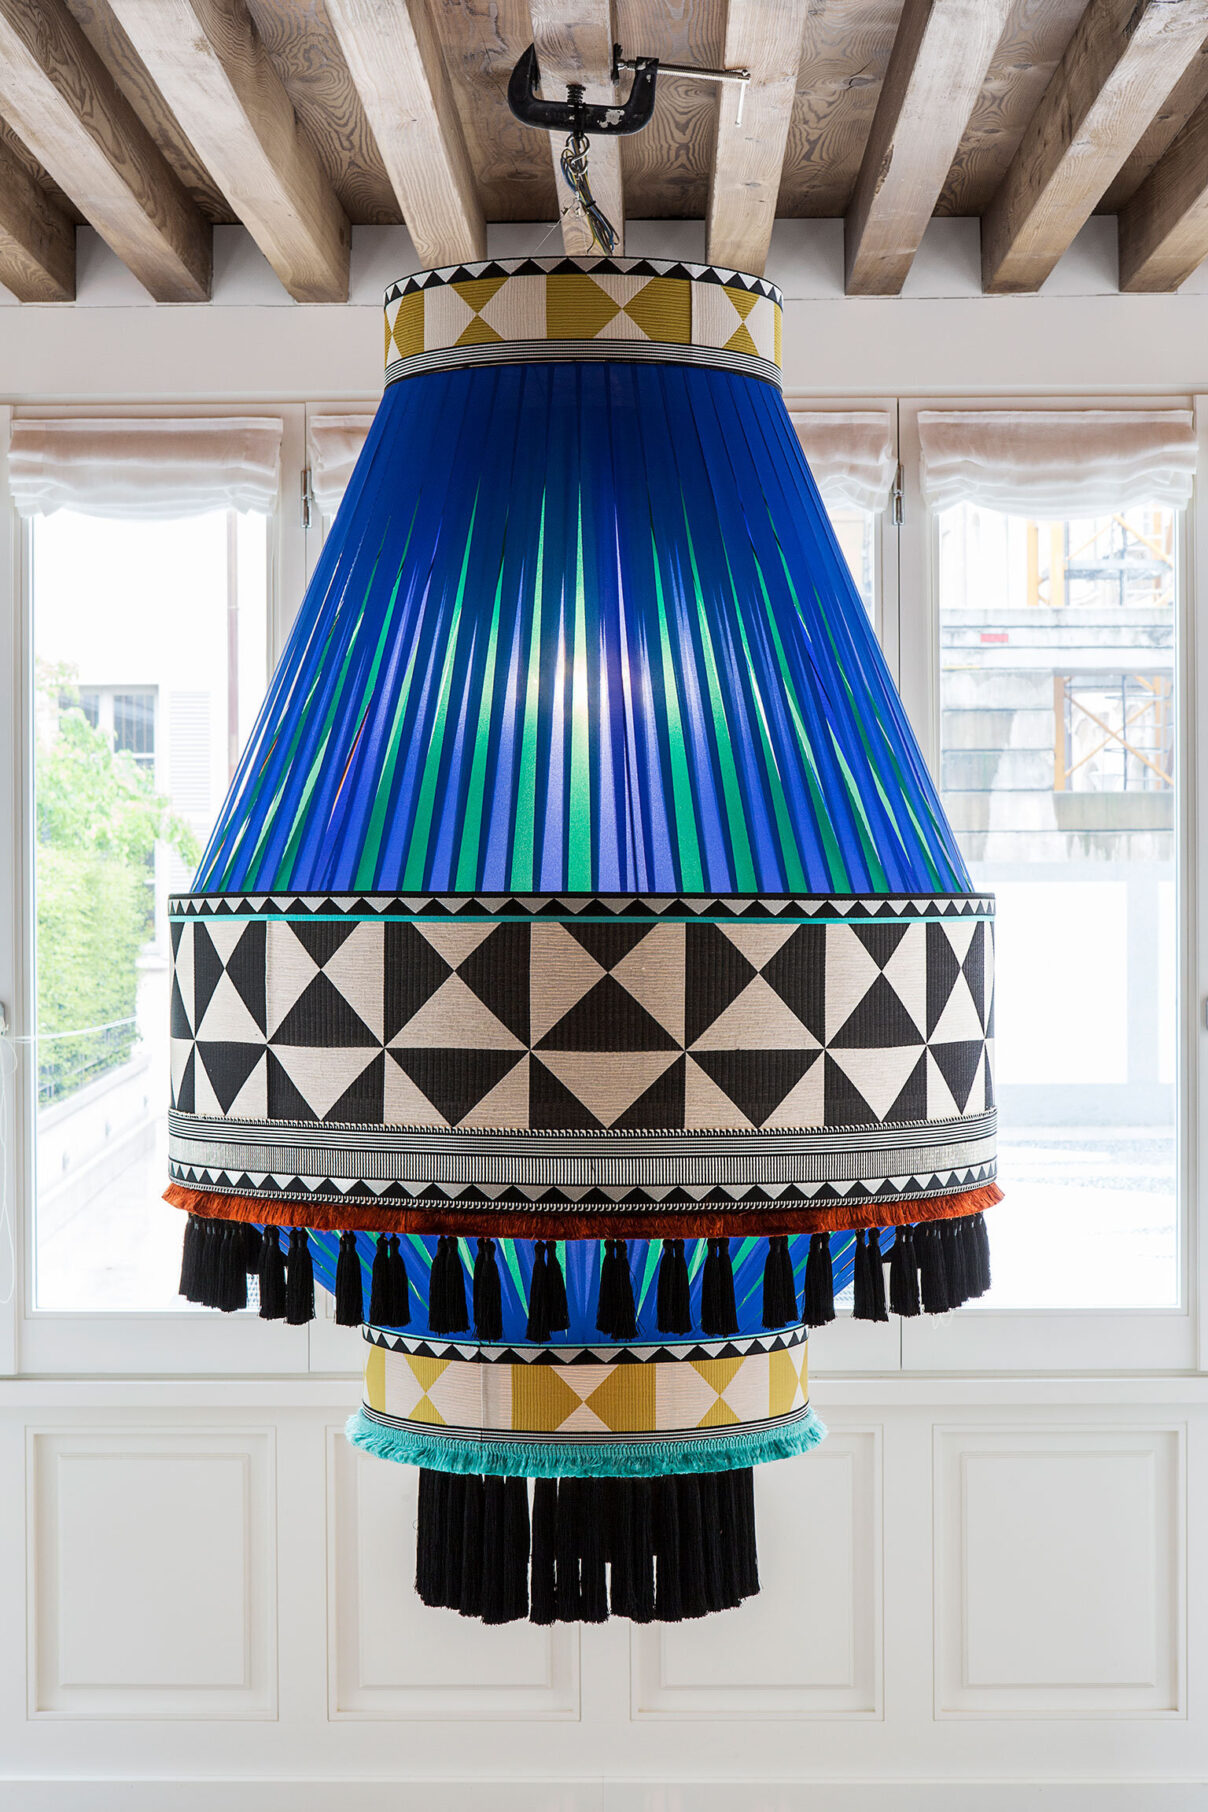 The Circus Chandelier was inspired by 18th-century decorative fixtures typically found in Bohemia's luxury homes and palaces.